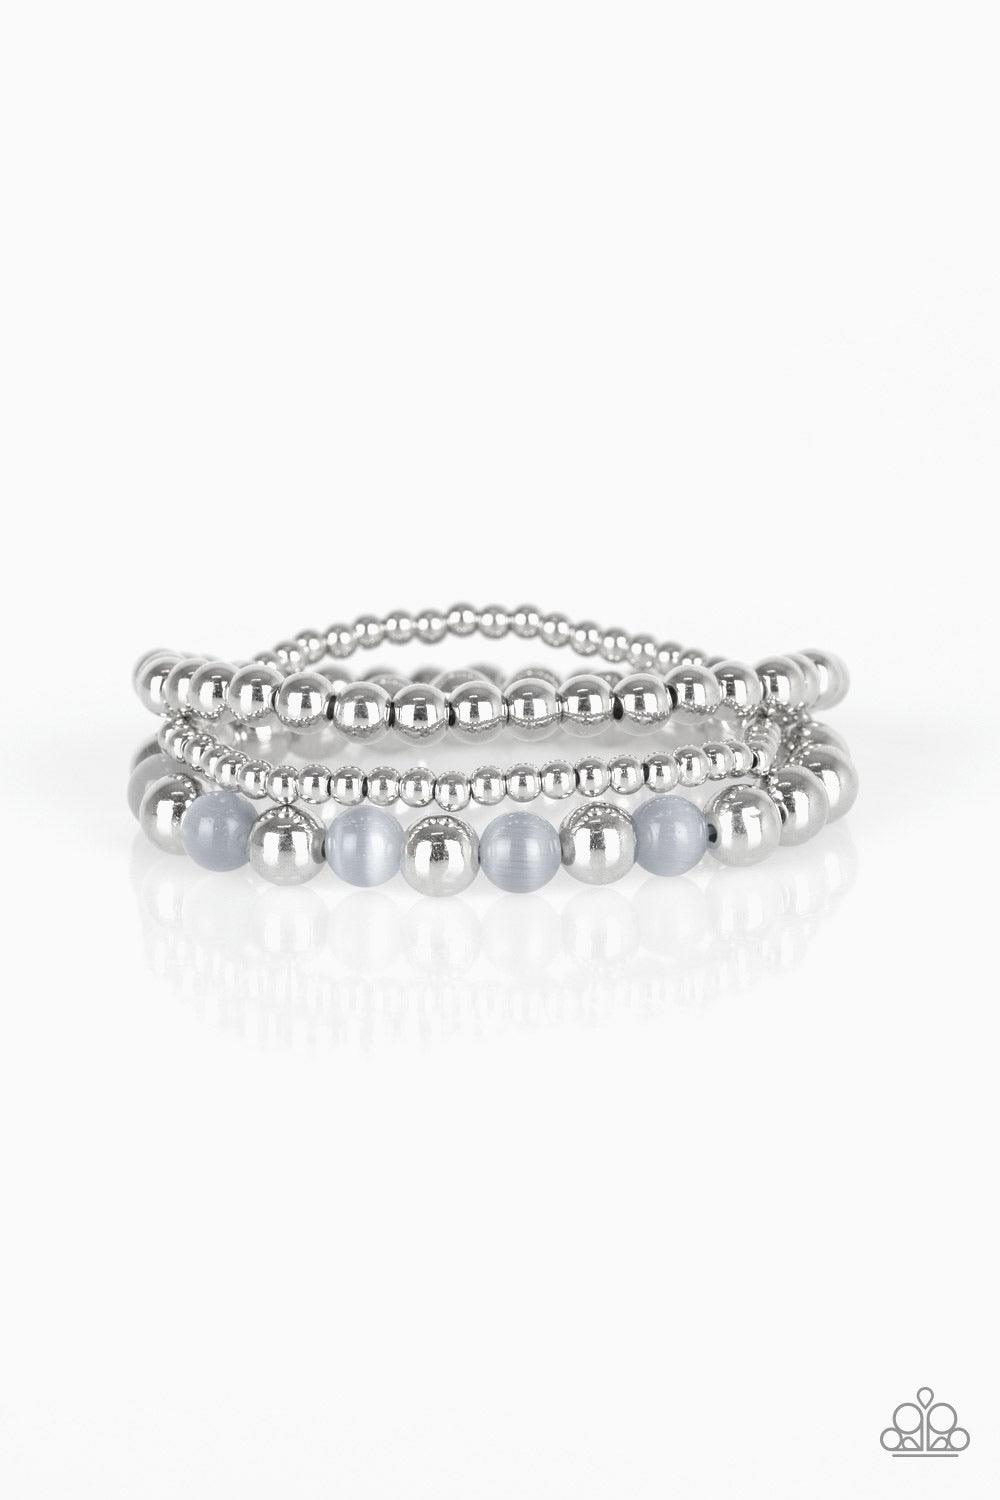 Always On The Glow ~Silver - Beautifully Blinged